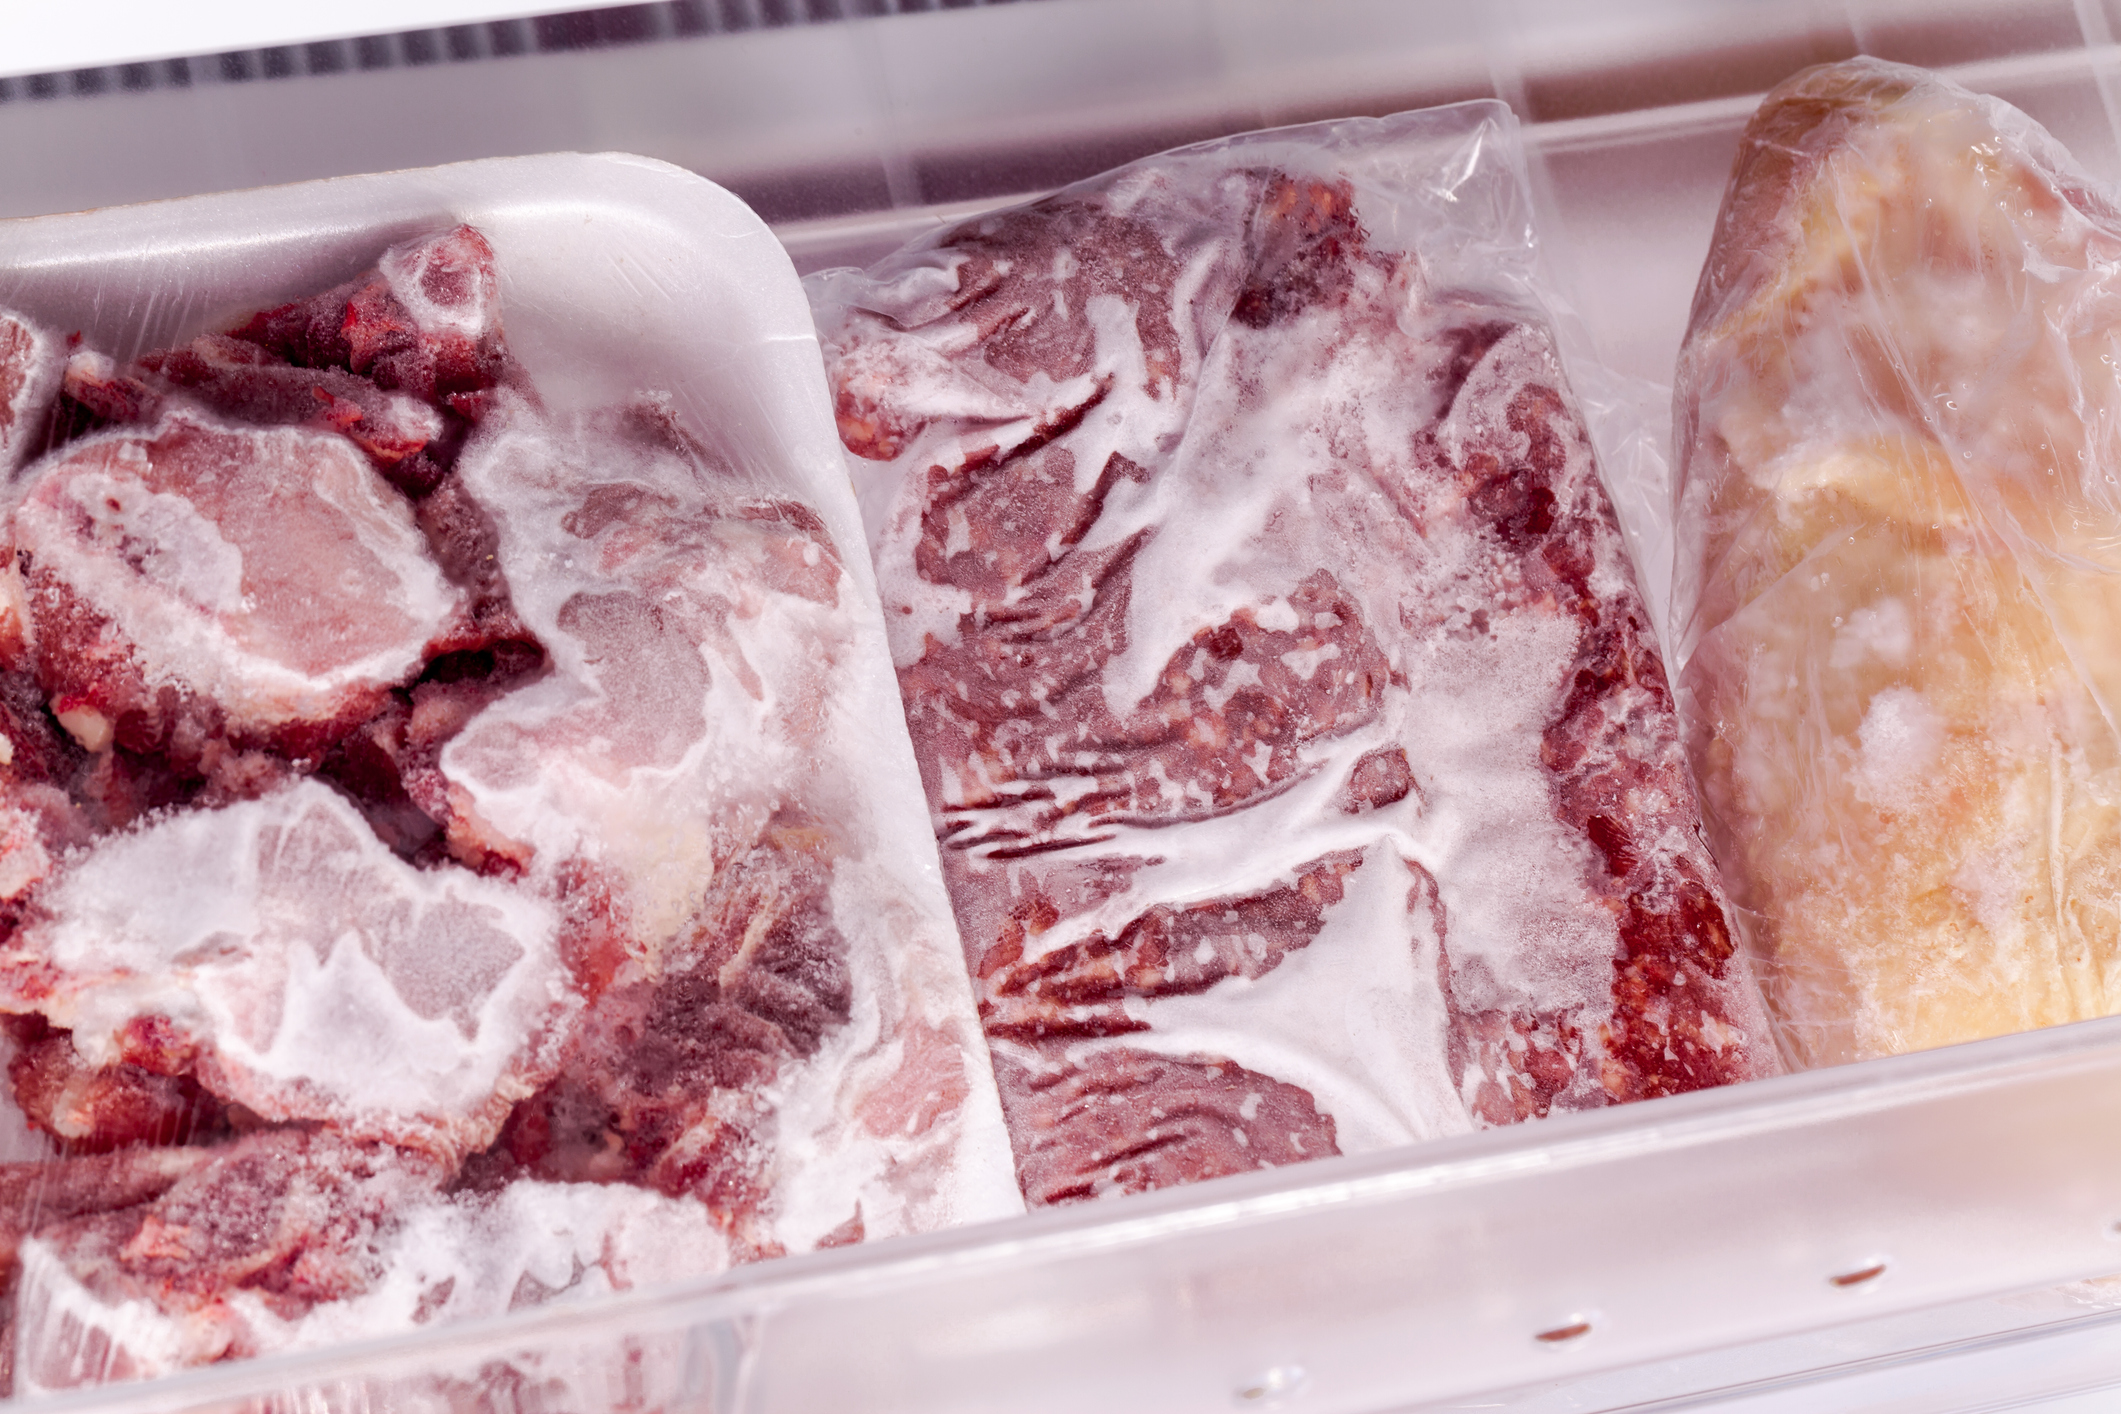 Frozen packages of various meats with freezer burn